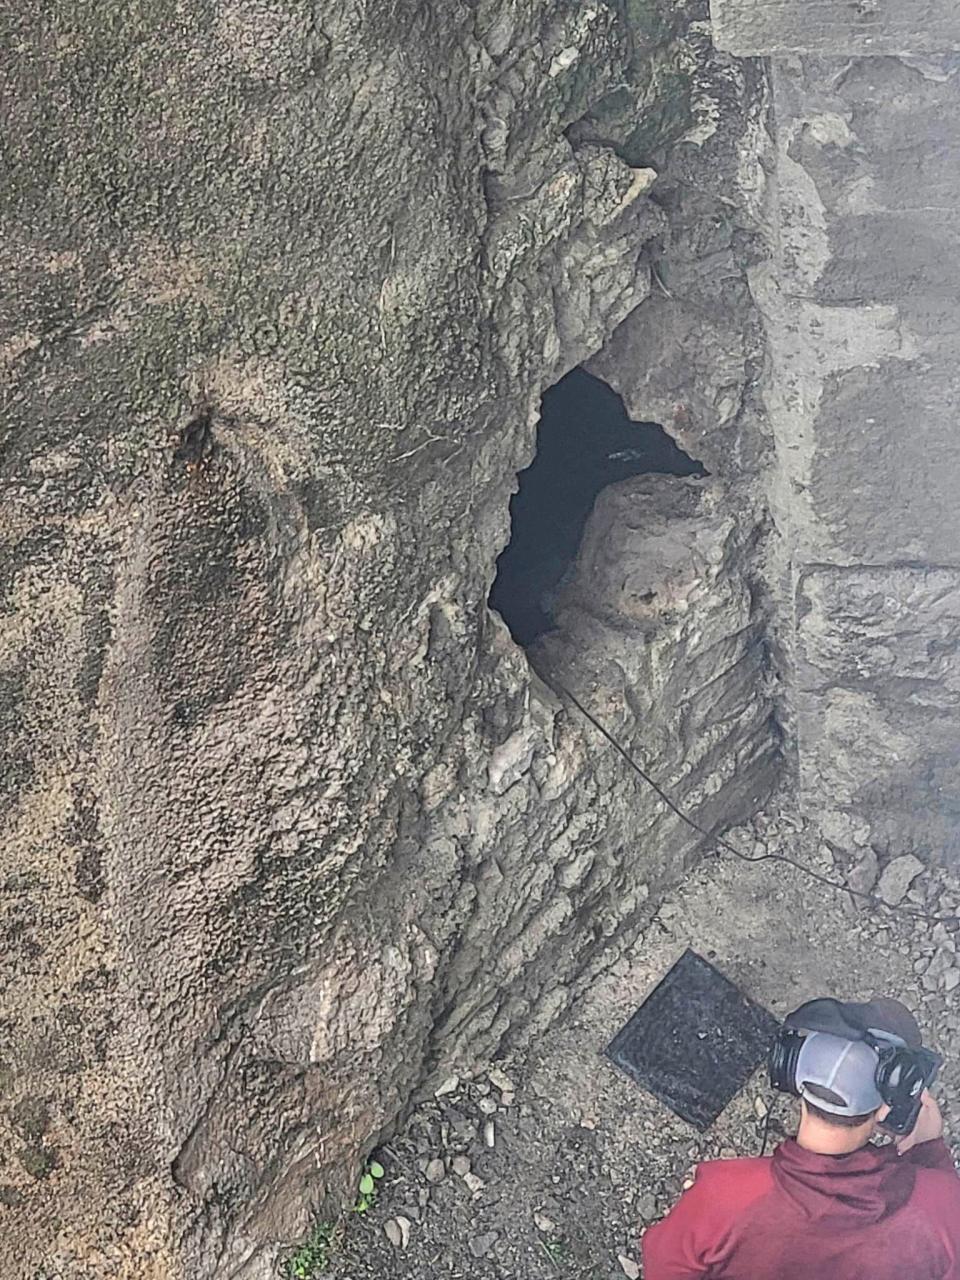 This photo provided by Jeremy Swiatowy shows rescue workers as they breach a wall with a sledgehammer June 12, 2023, before going through the hole to help rescue people stuck inside the caves in Lockport, N.Y.